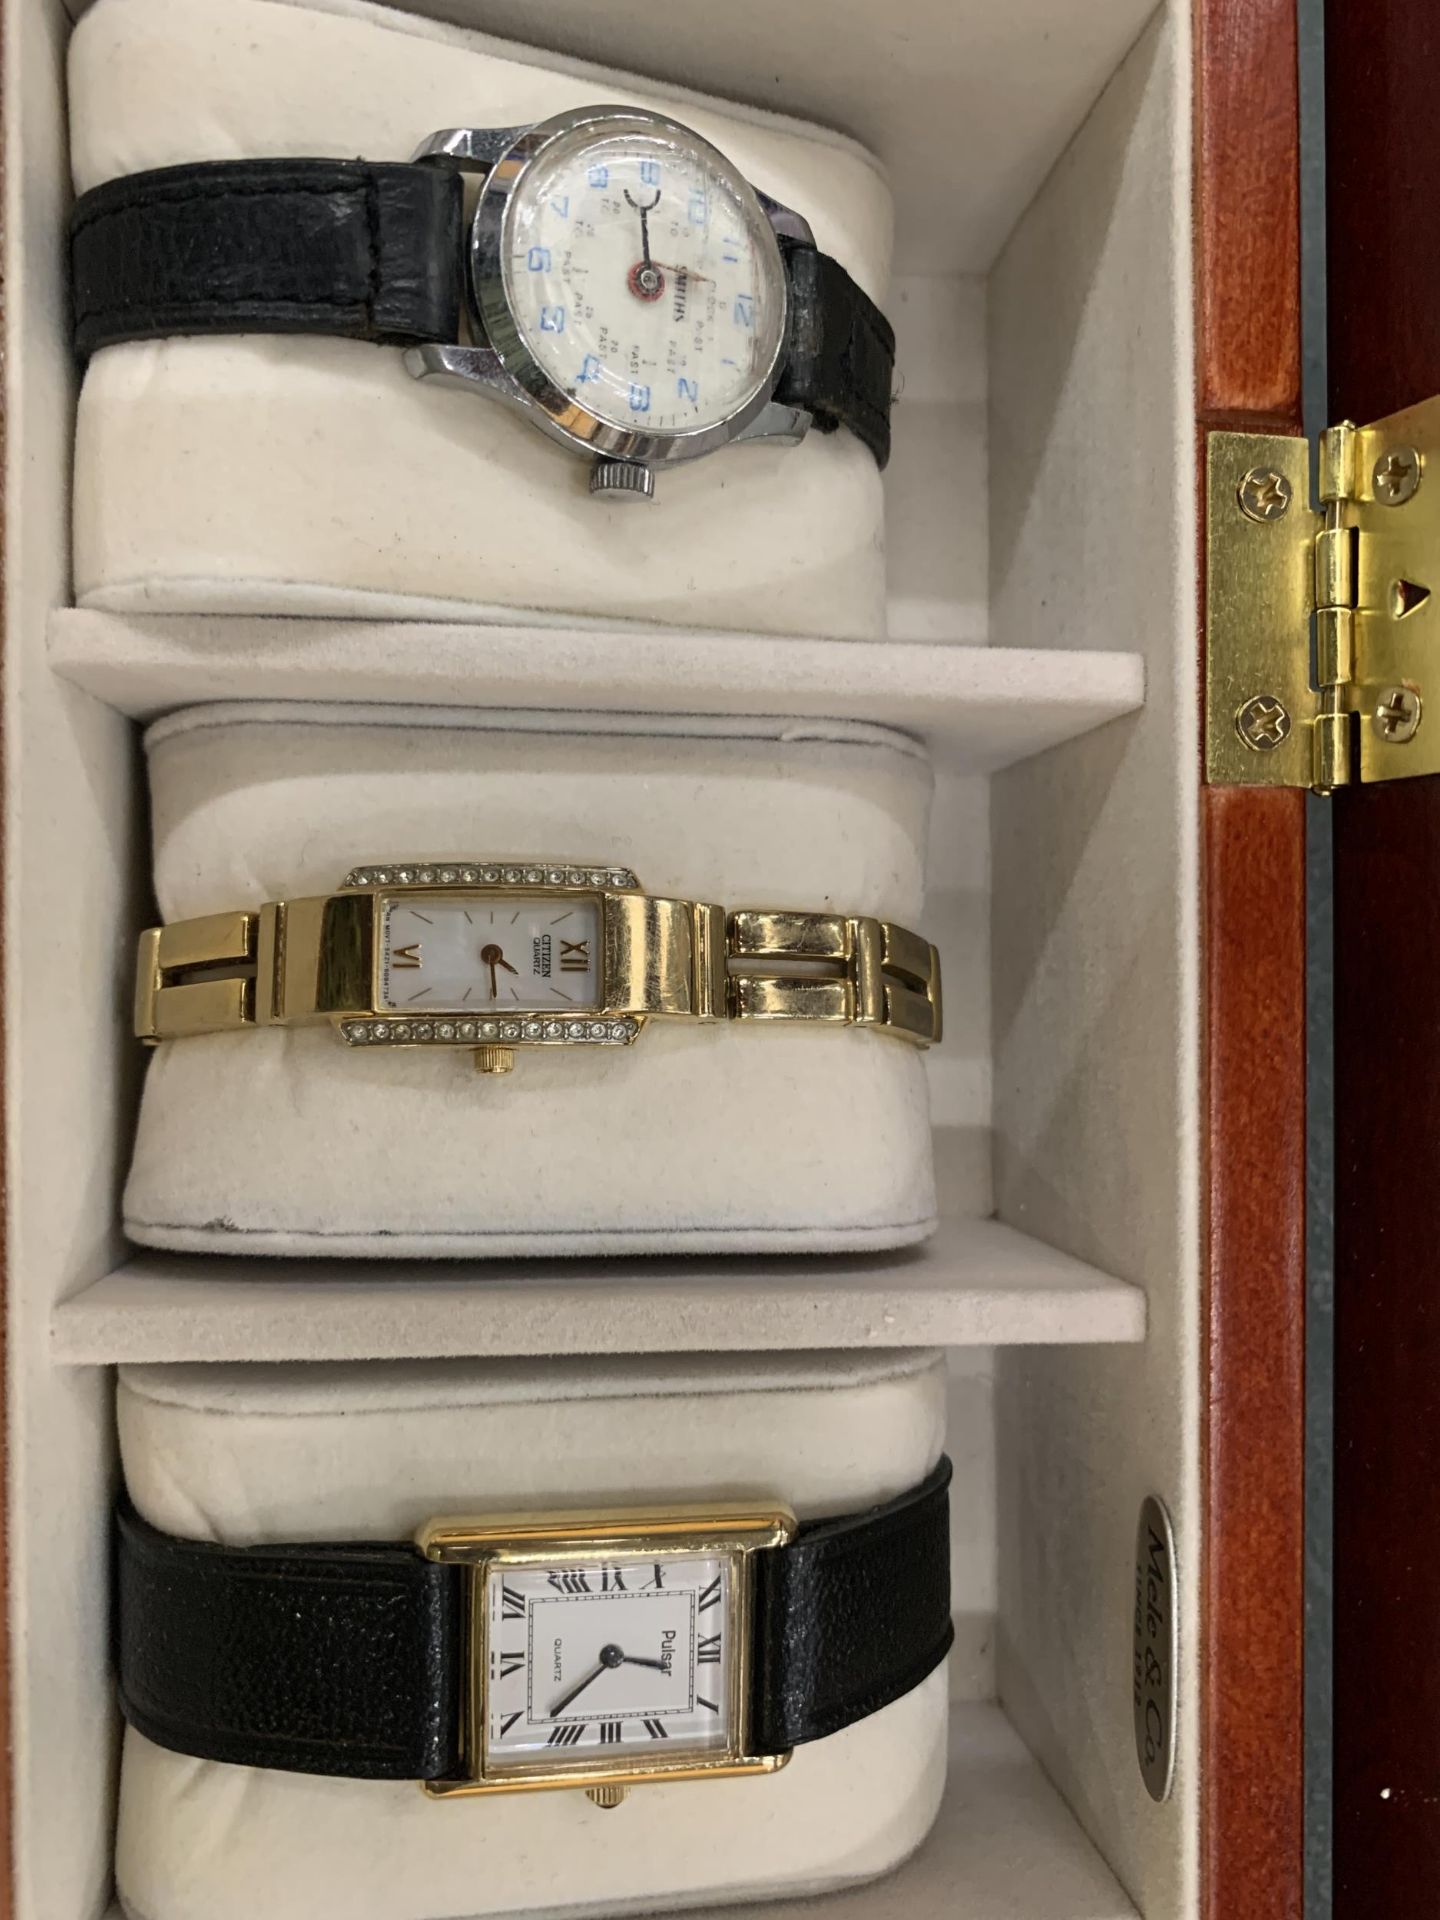 FIVE LADIES WRISTWATCHES IN A WOODEN CASE - Image 3 of 6